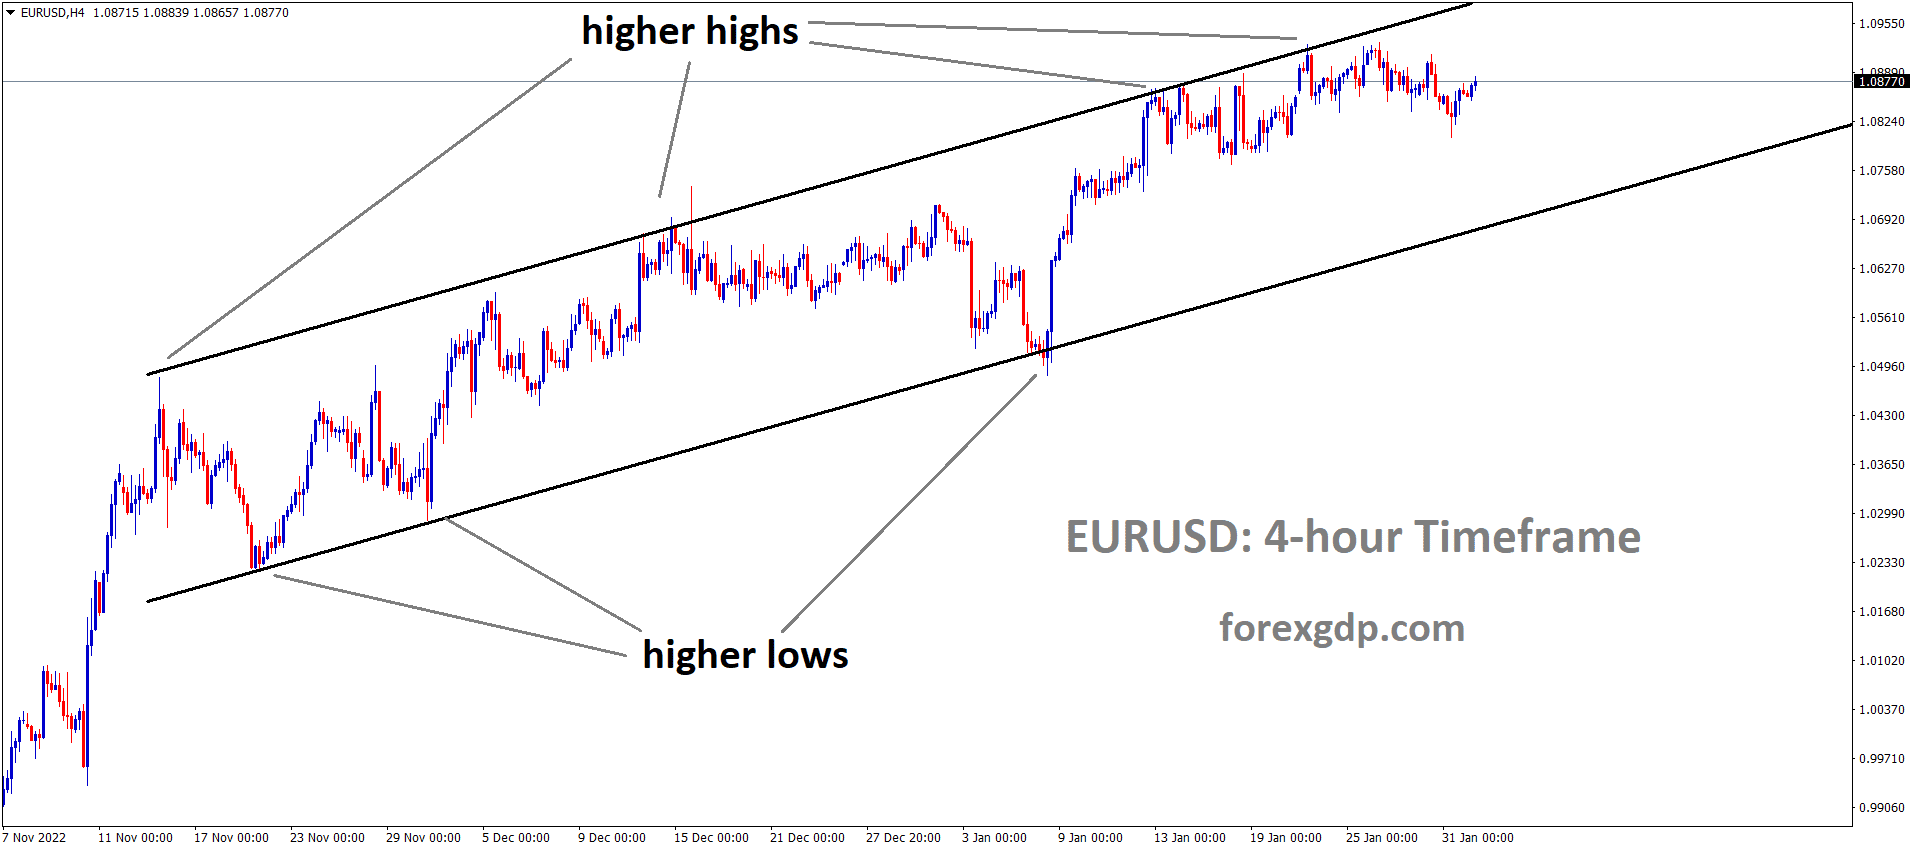 EURUSD H4 TF analysis Market is moving in an Ascending channel and the market has fallen from the higher high area of the channel